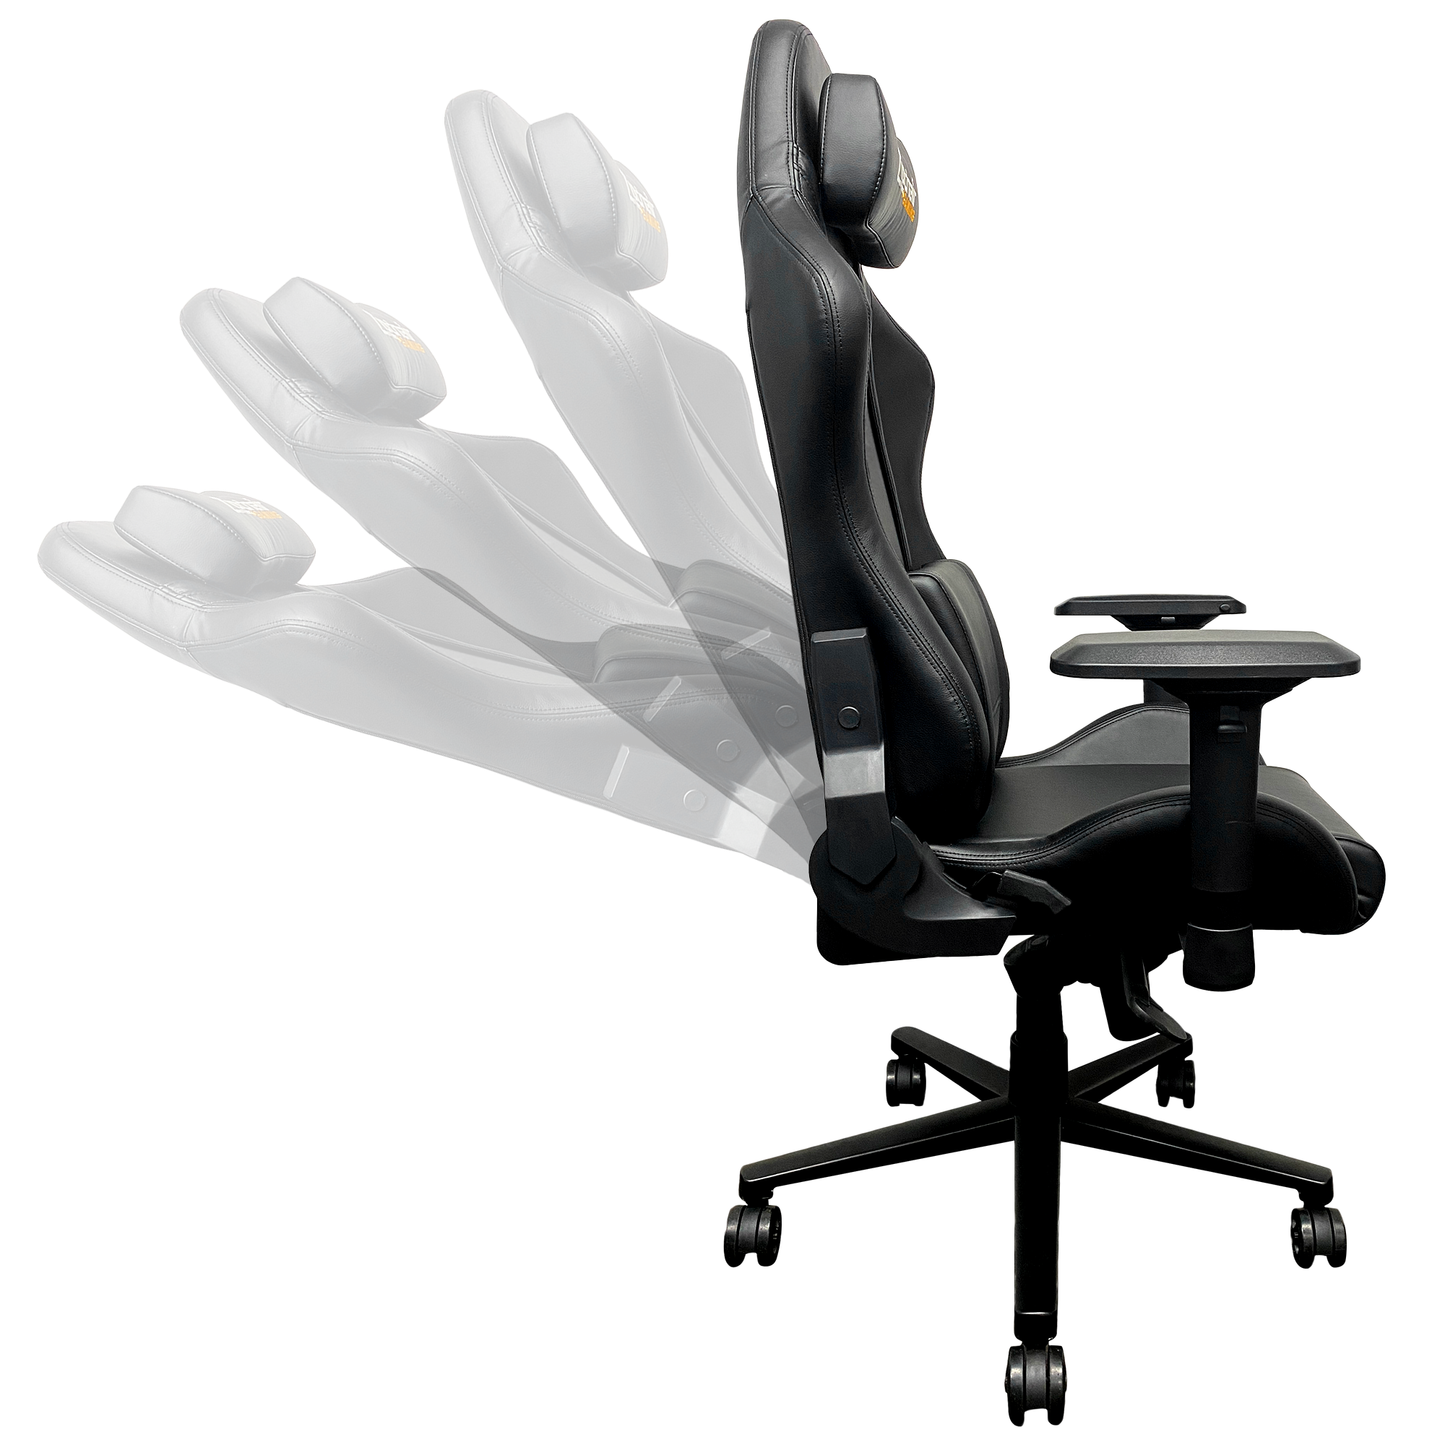 Xpression Pro Gaming Chair with Utah Jazz Global Logo